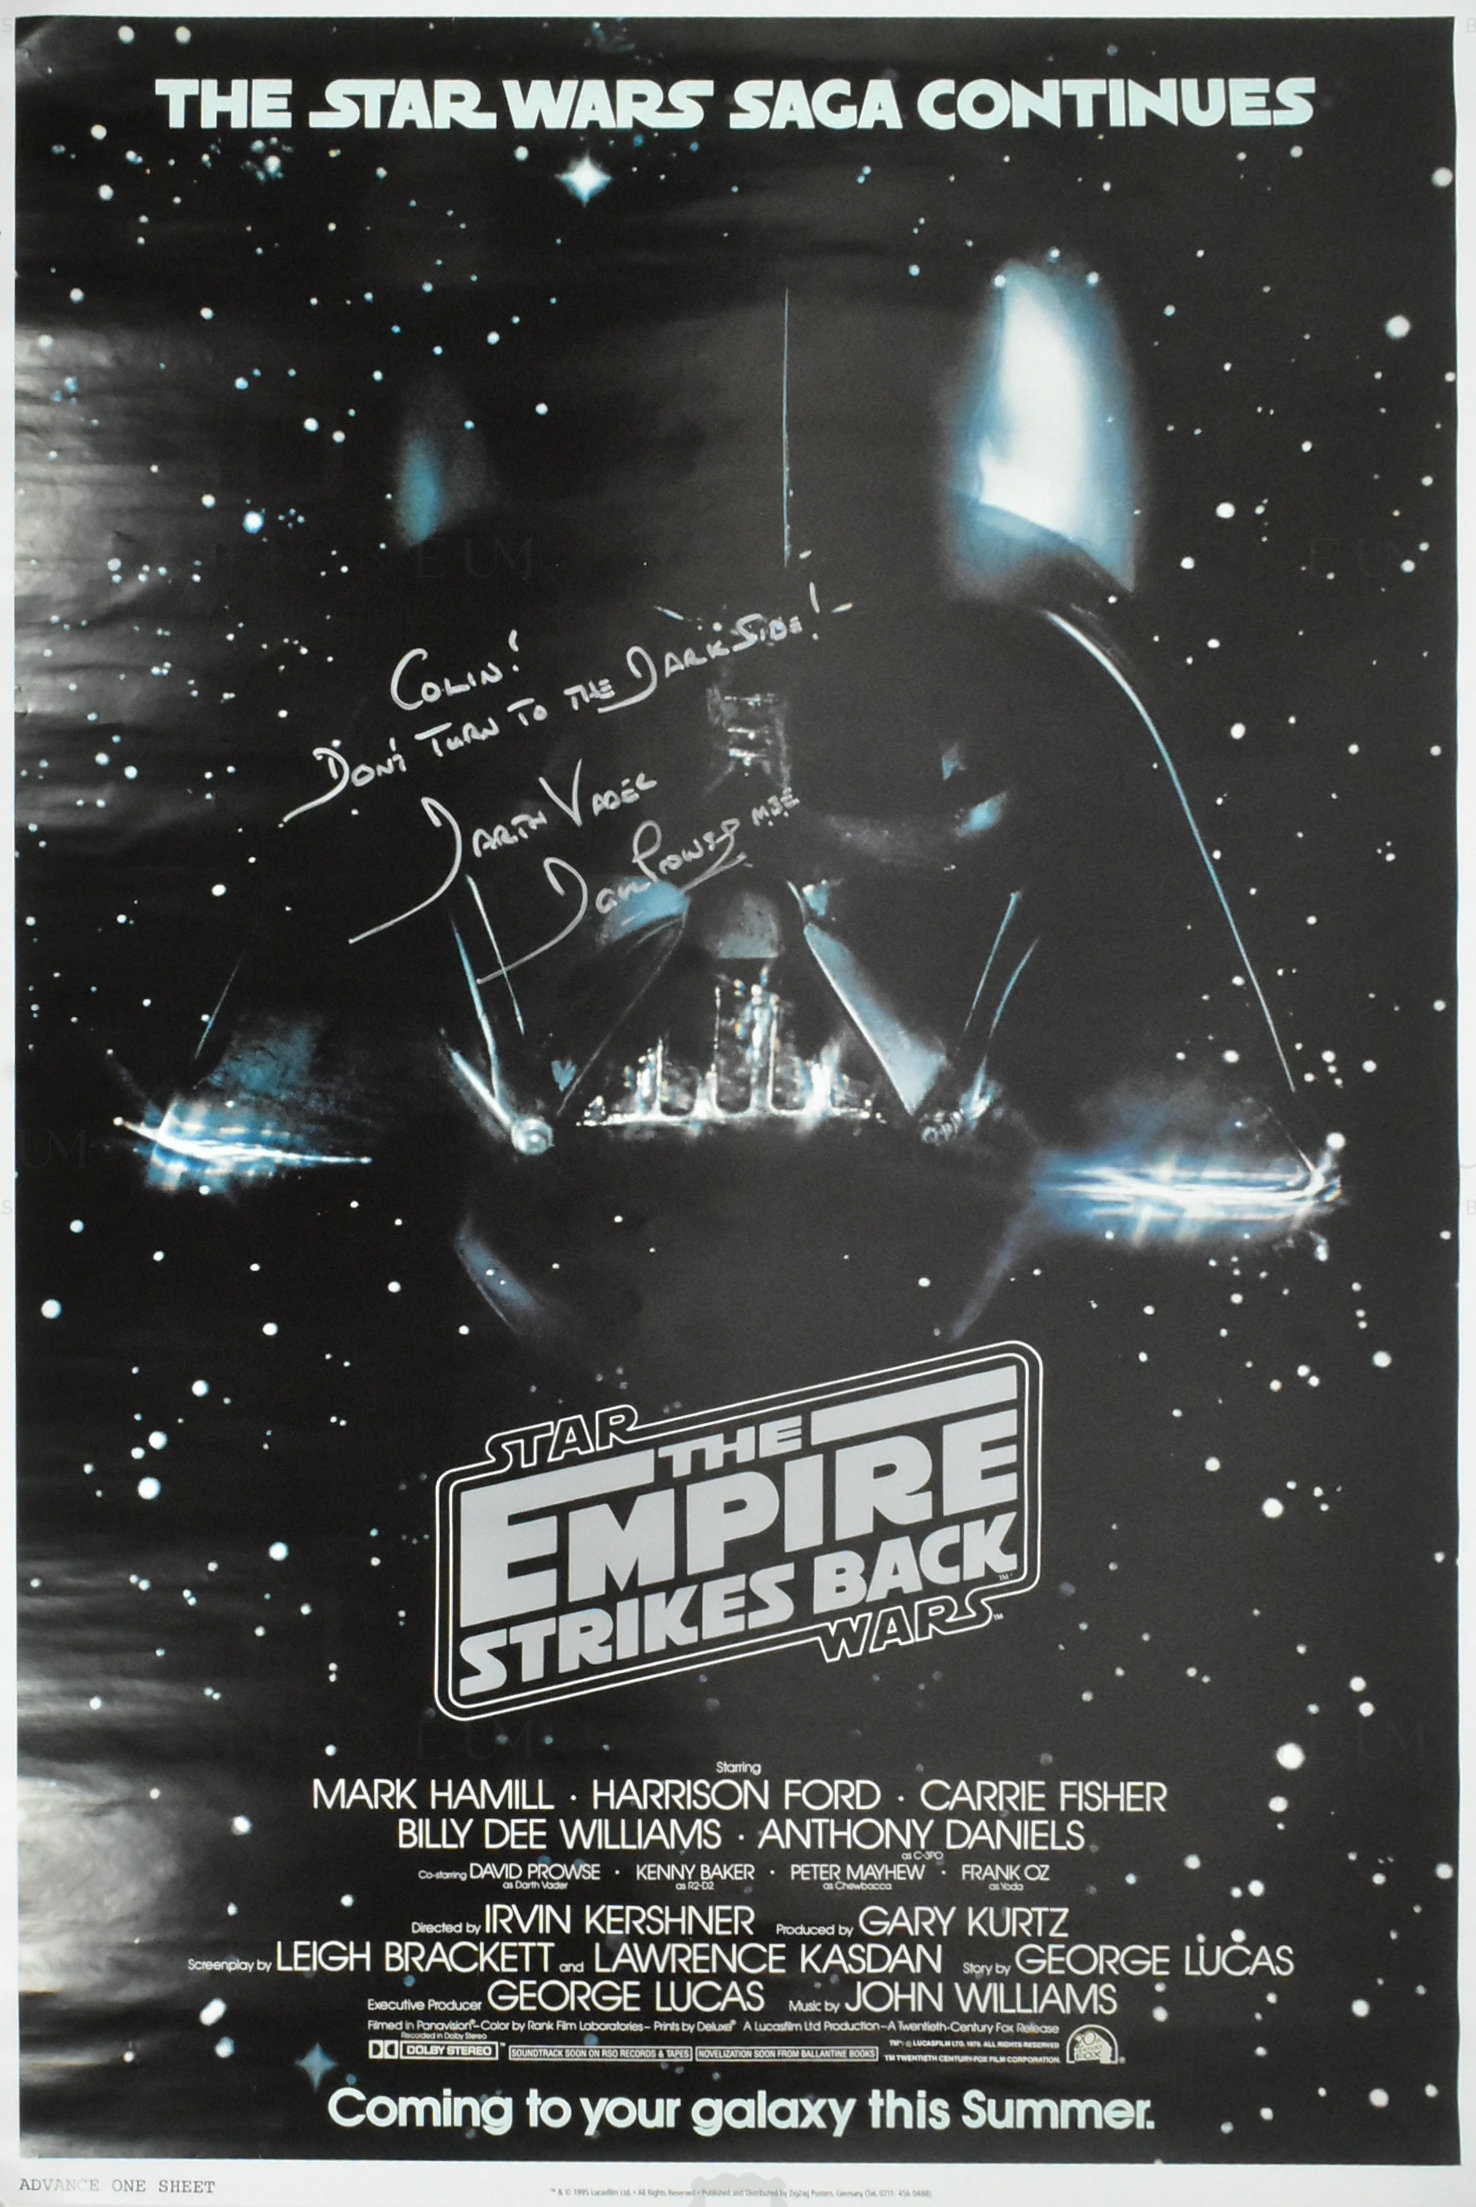 ESTATE OF DAVE PROWSE - STAR WARS - ESB - SIGNED ONE SHEET POSTER - Image 3 of 3